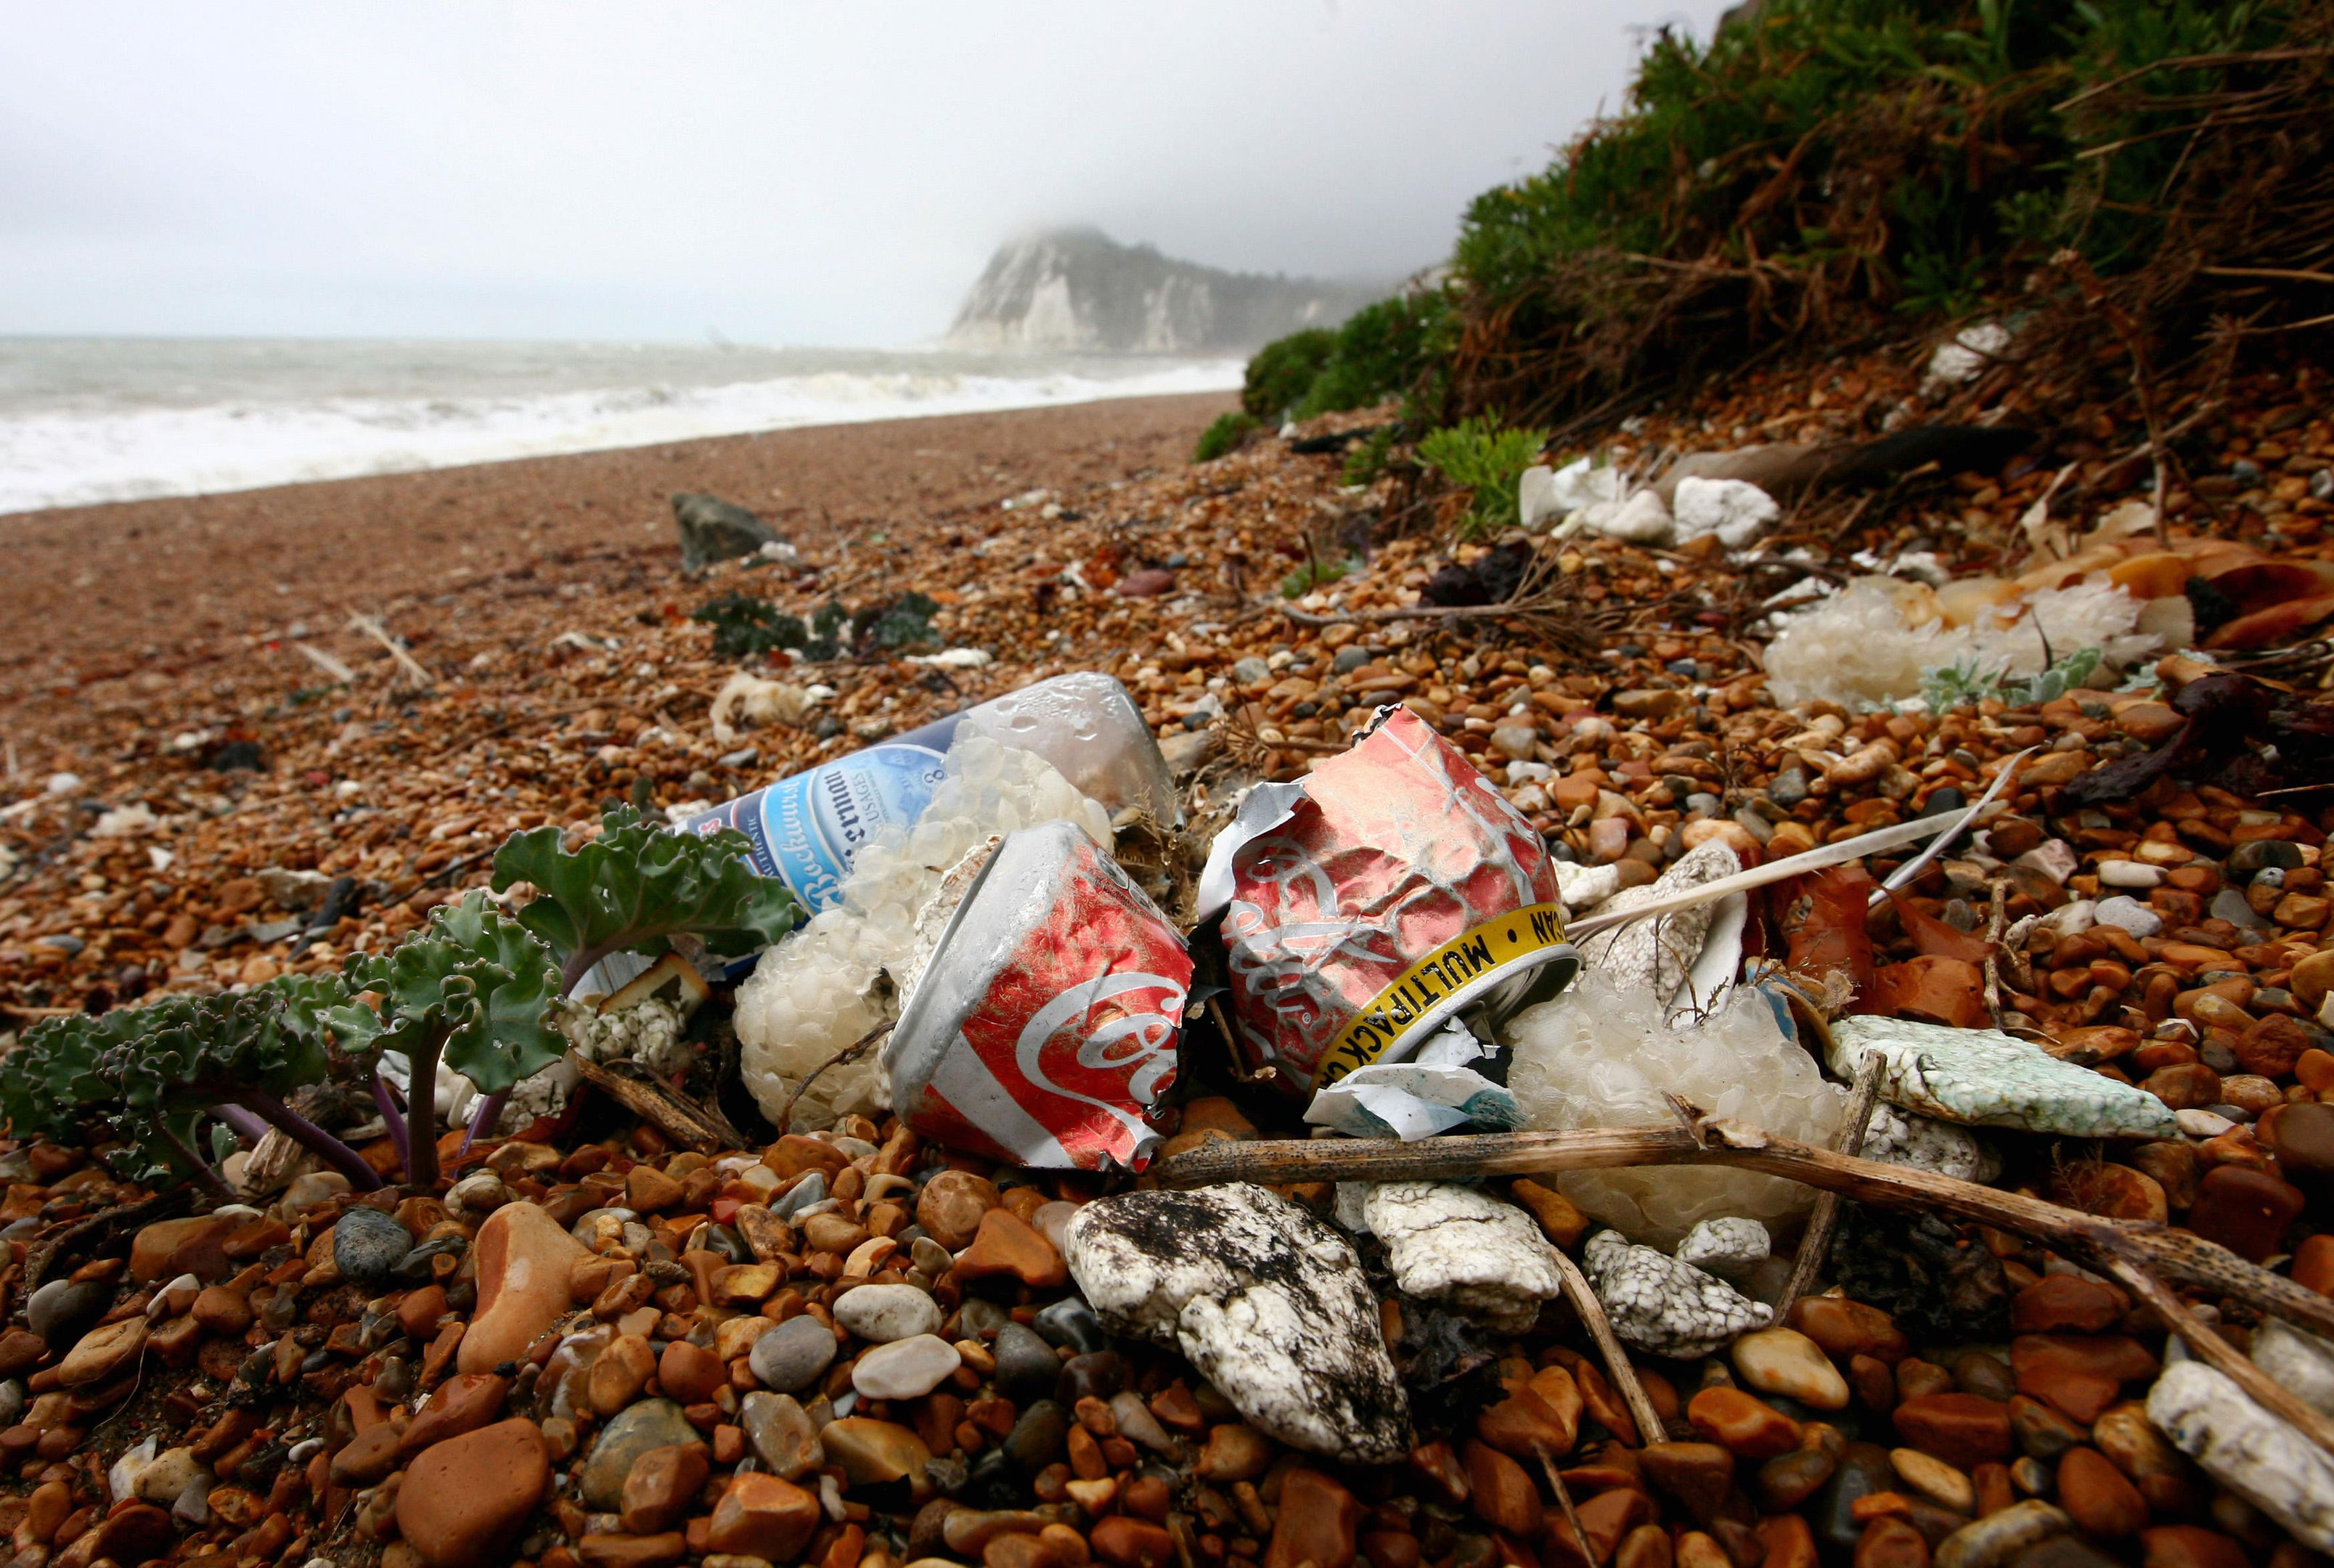 On average, 138 pieces of food and drink waste were found for every 100 metres of beach, with items picked up in the Marine Conservation Society's Great British Beach Clean ranging from plastic cutlery and straws to sandwich packaging and lolly sticks. (Gareth Fuller/PA Wire)